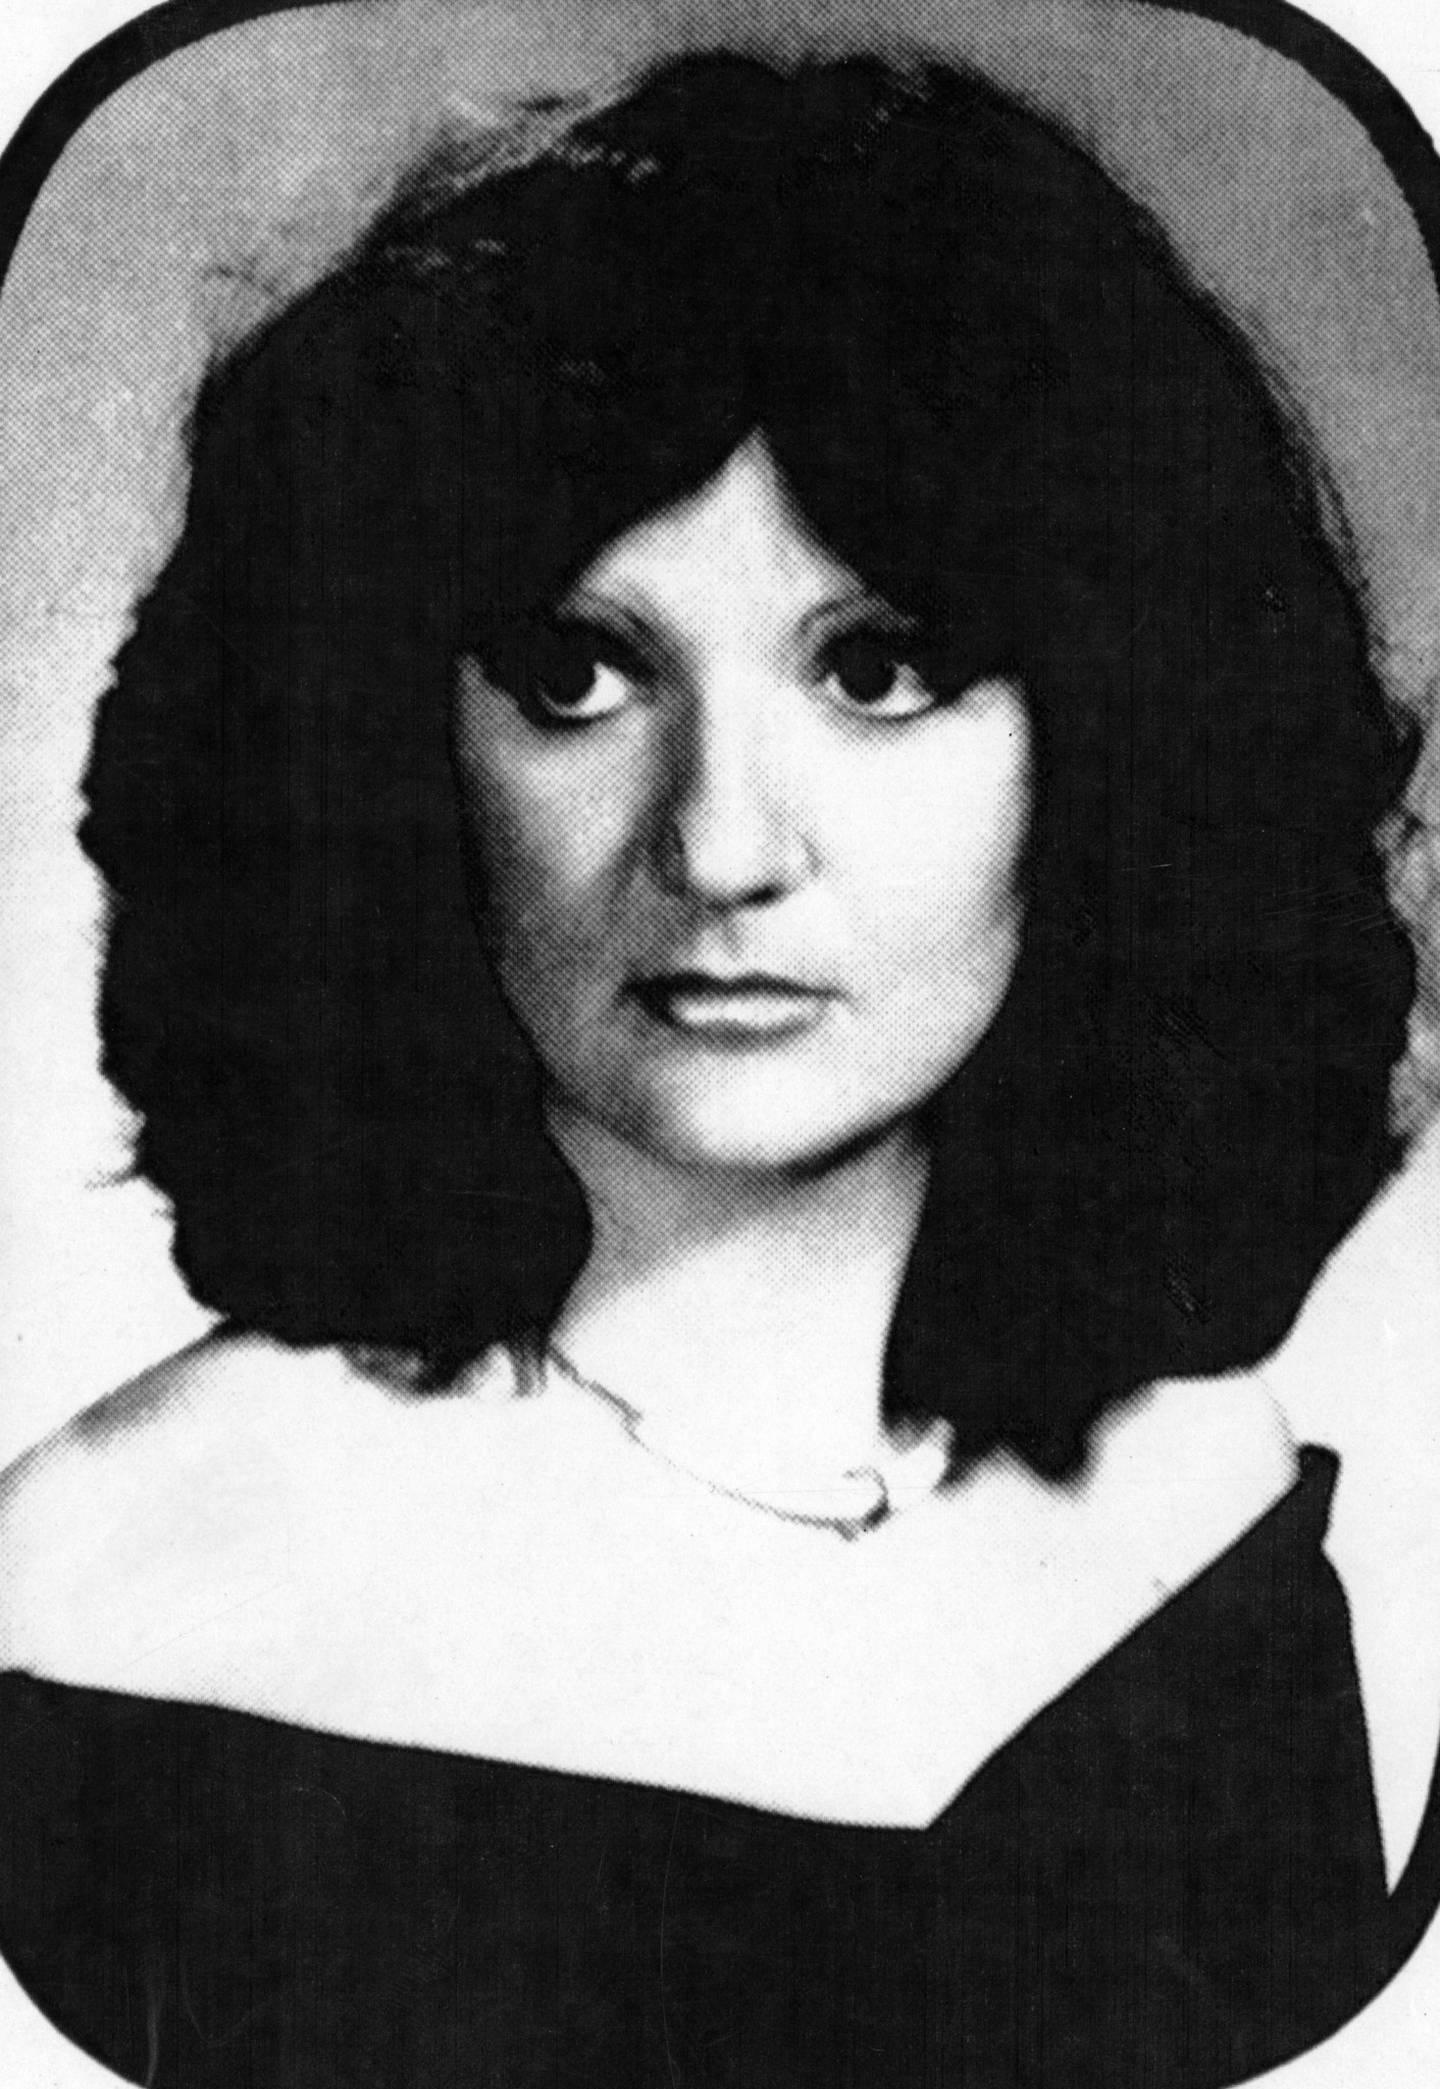 Diane Elsroth of Peekskill, New York, shown in a 1980 high school yearbook photo, died at age 23 in February 1986 after taking a cyanide-laced Extra-Strength Tylenol capsule.